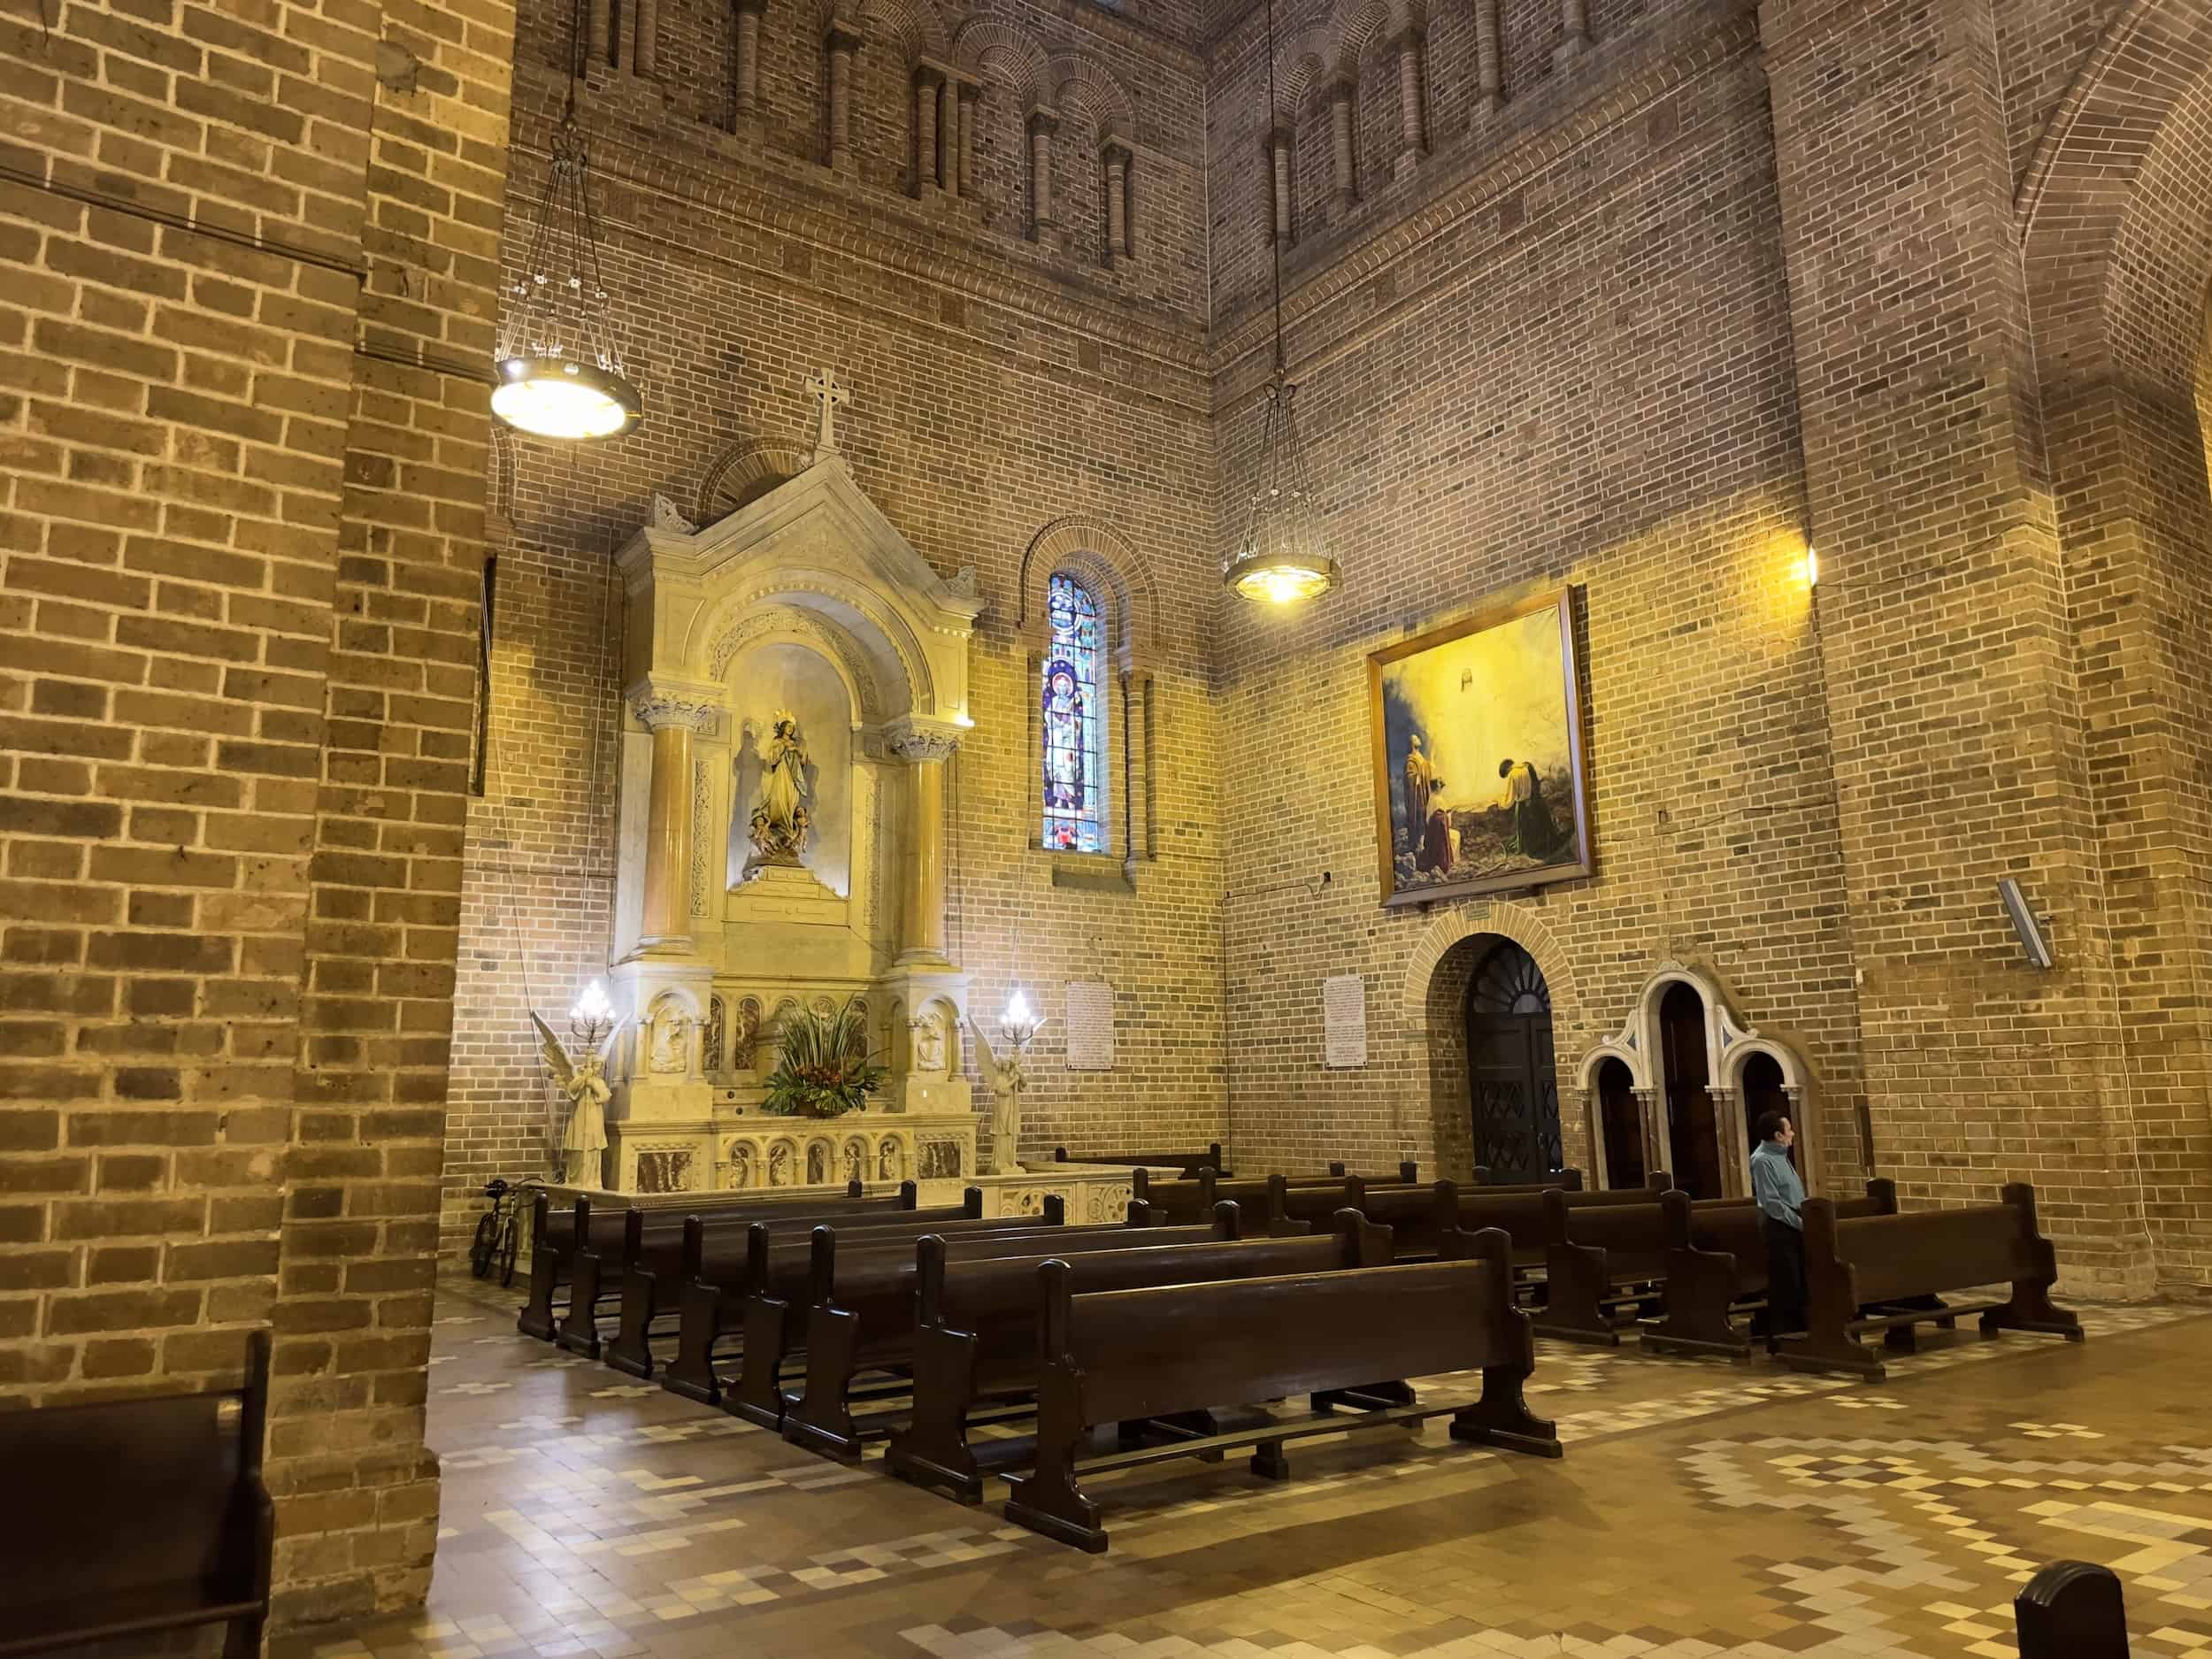 West transept of the Metropolitan Cathedral in Medellín, Antioquia, Colombia